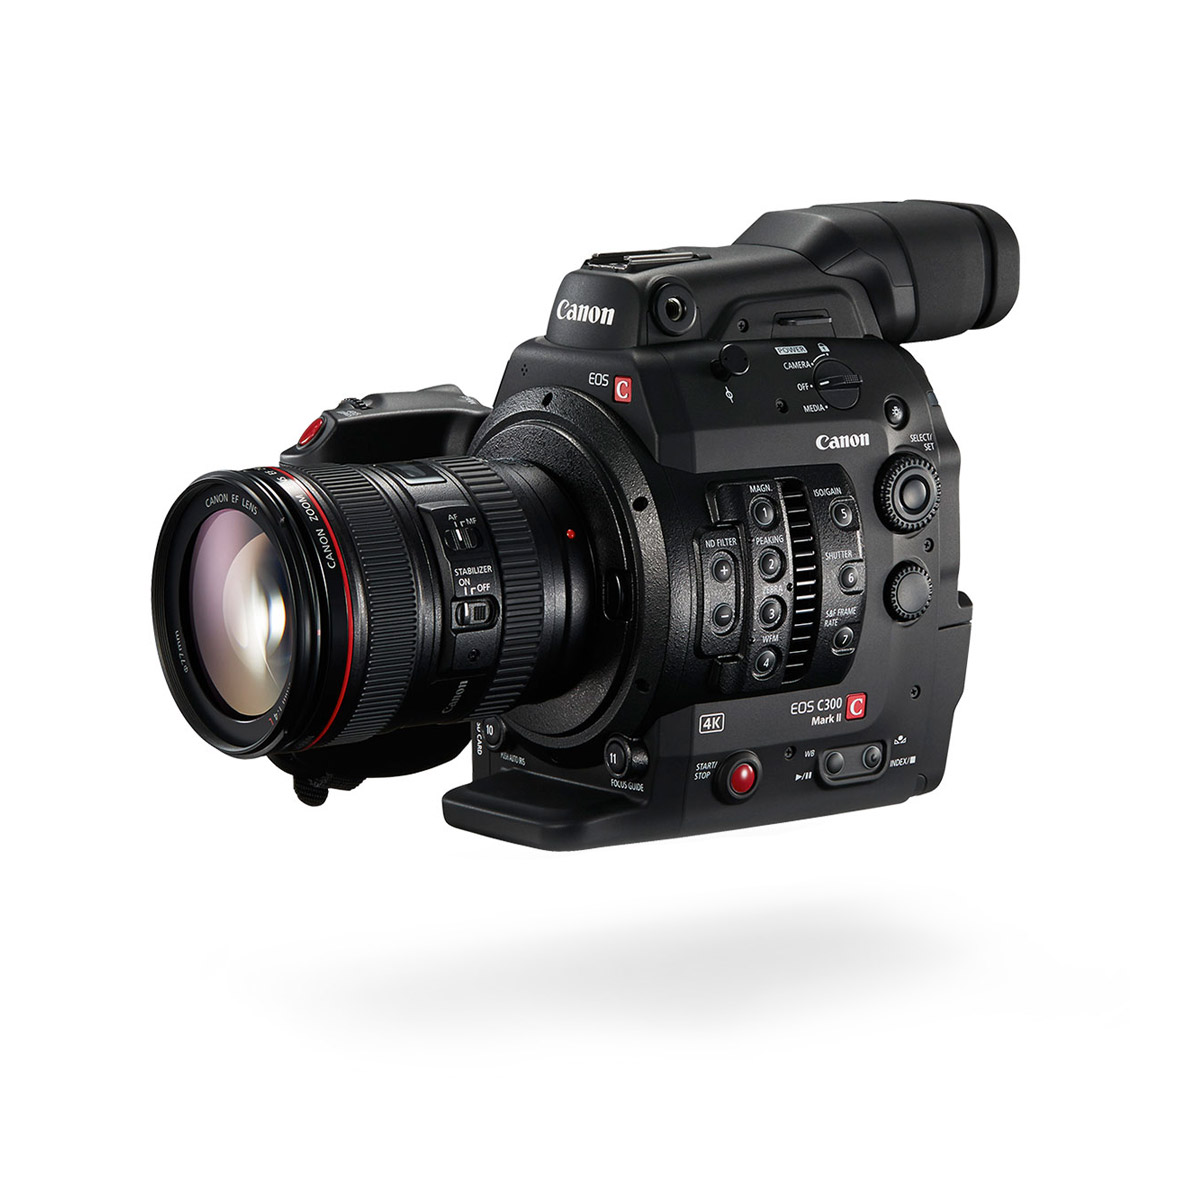 Cinema Cameras by Canon Professional Film Cameras for Every Filmmaker